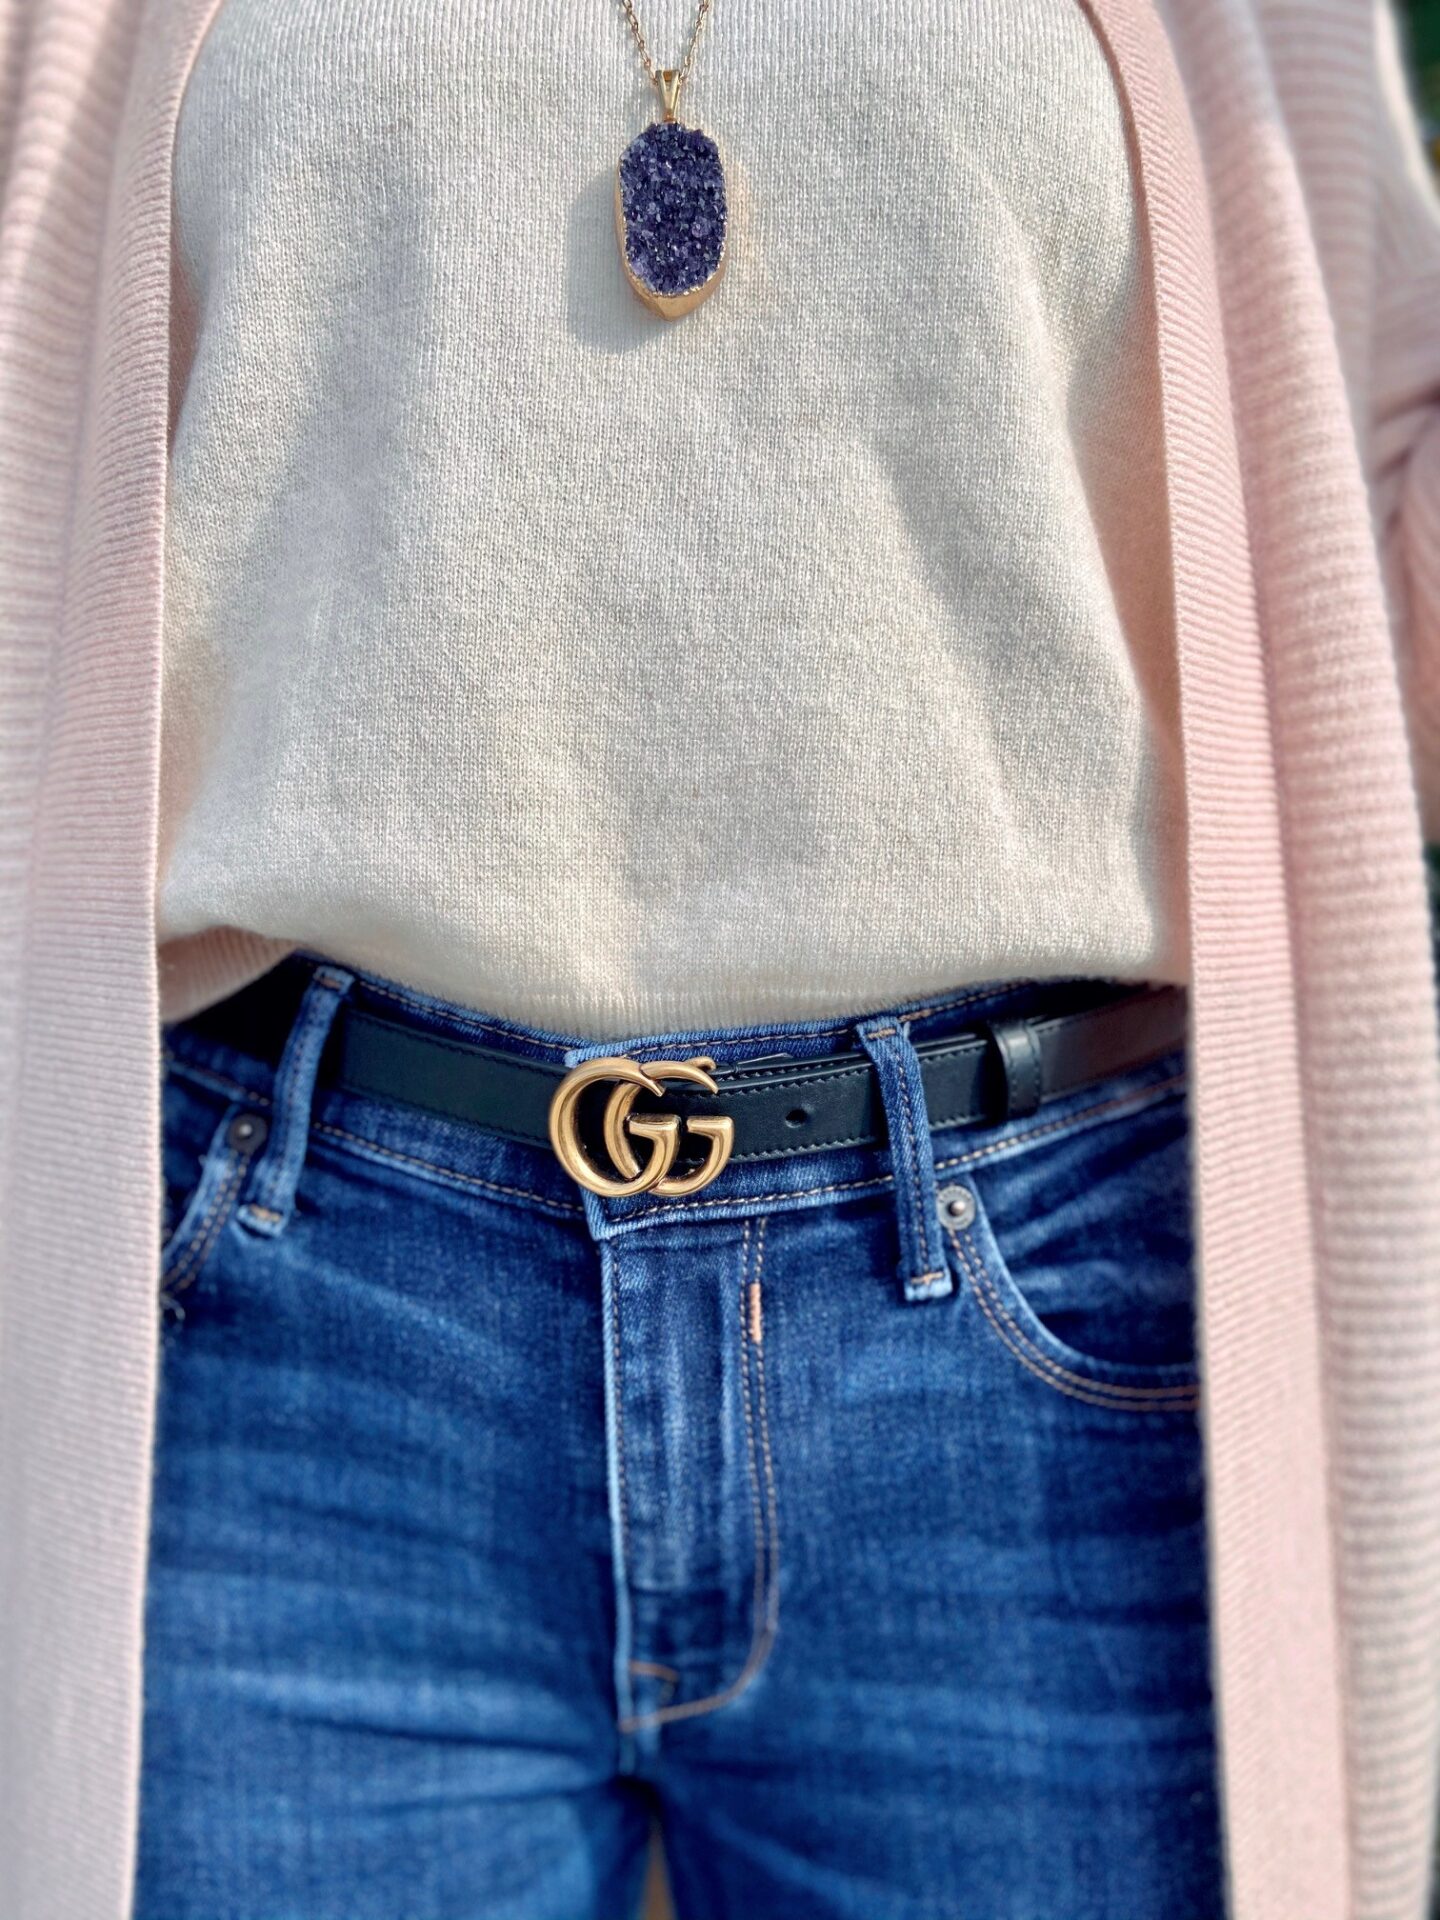 Review: Is the Gucci Belt Overrated? - Allure By Tess Fashion Blog